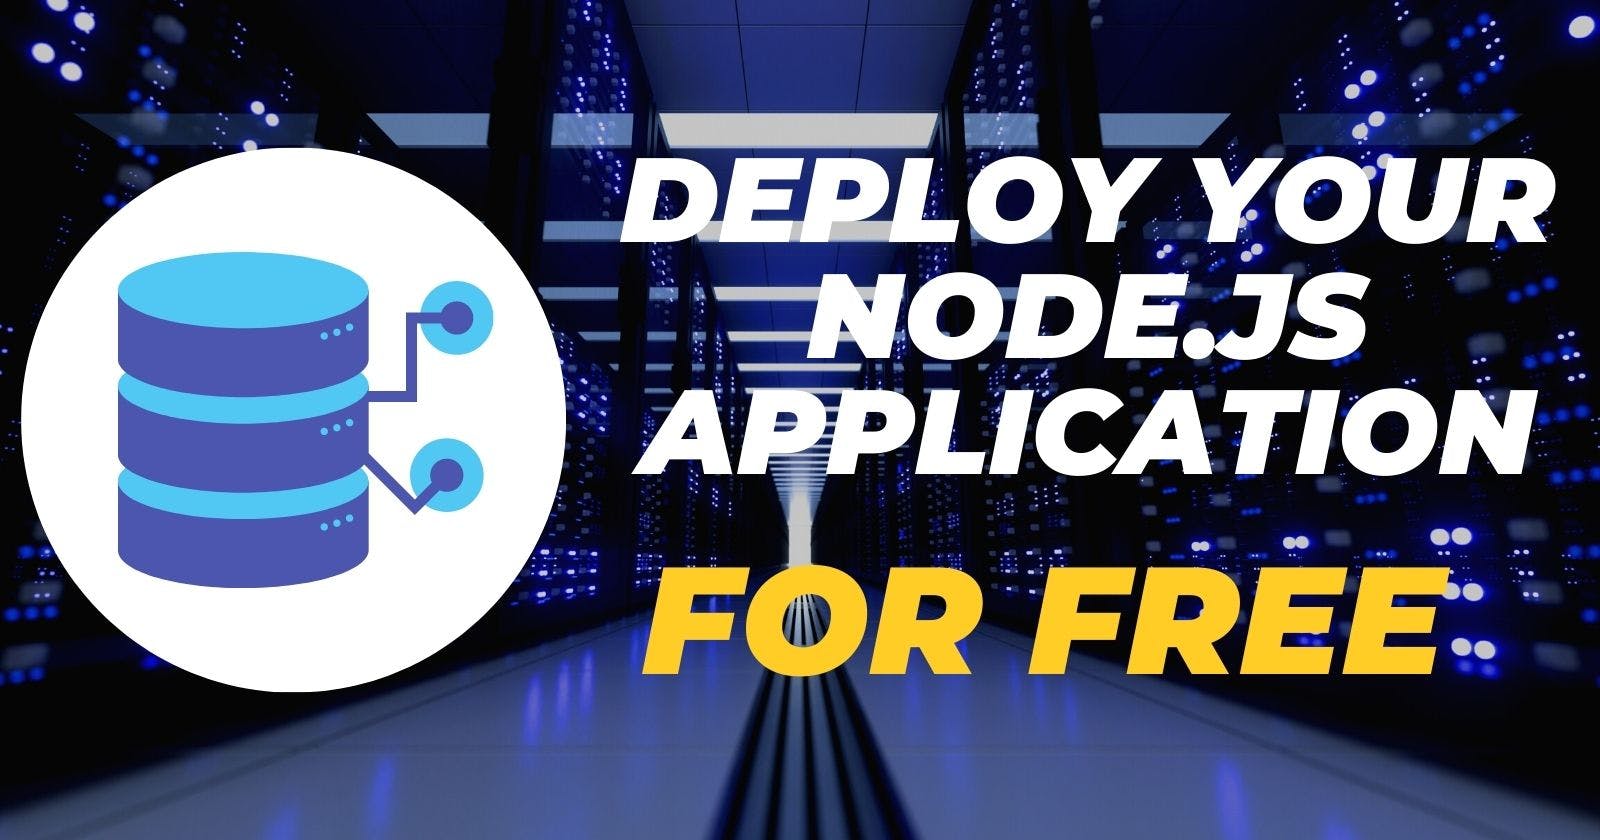 How to deploy your node.js application for free.